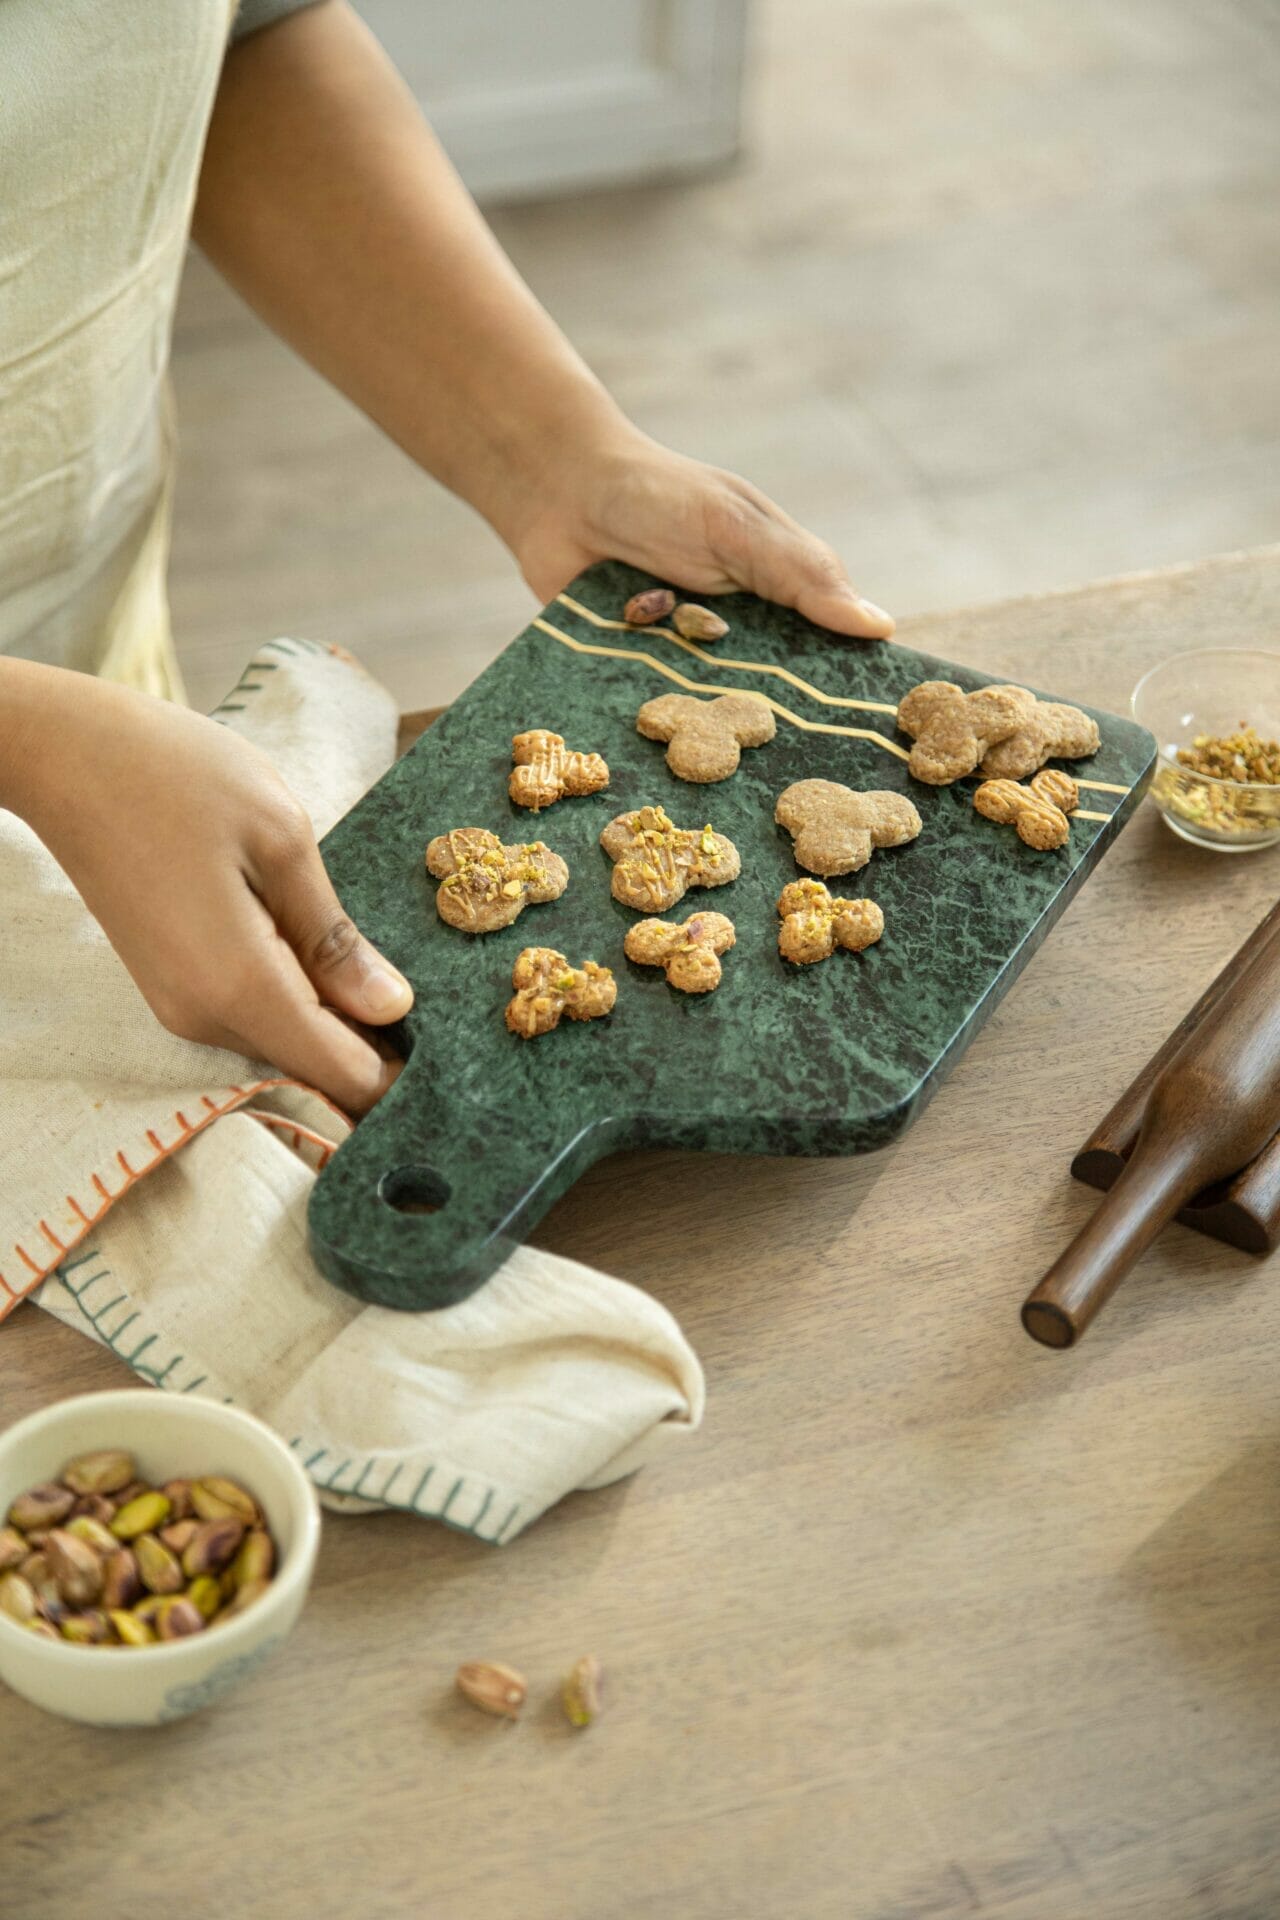 Cook in style - with ellementry's new Verde kitchenware collection